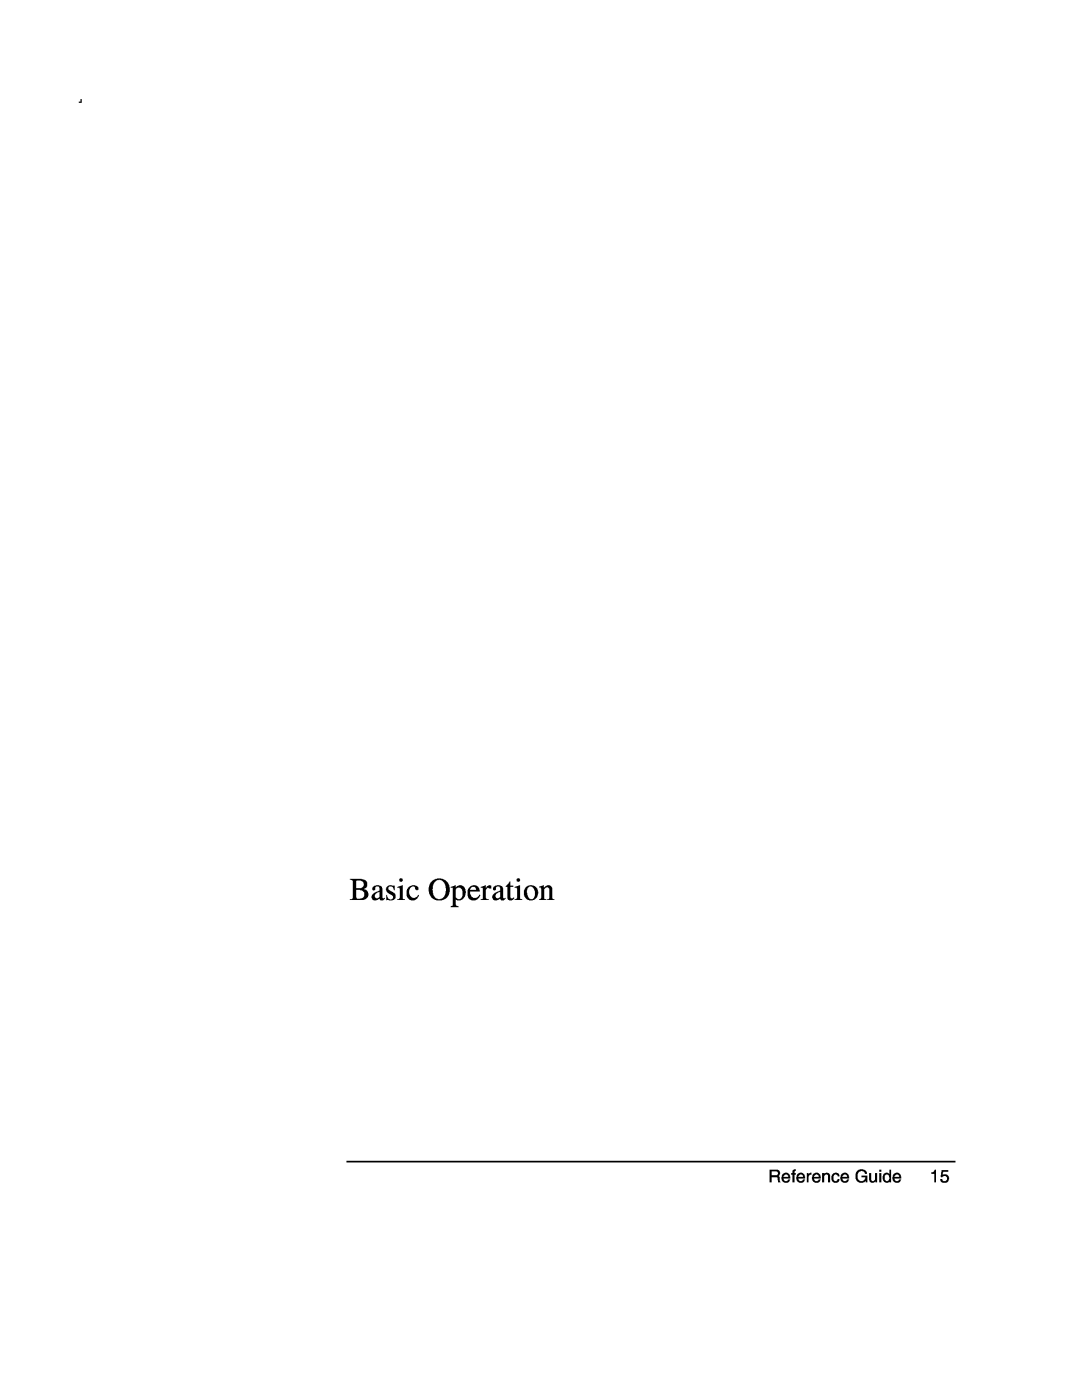 Compaq AMC20493-KT5 manual Basic Operation, Reference Guide 